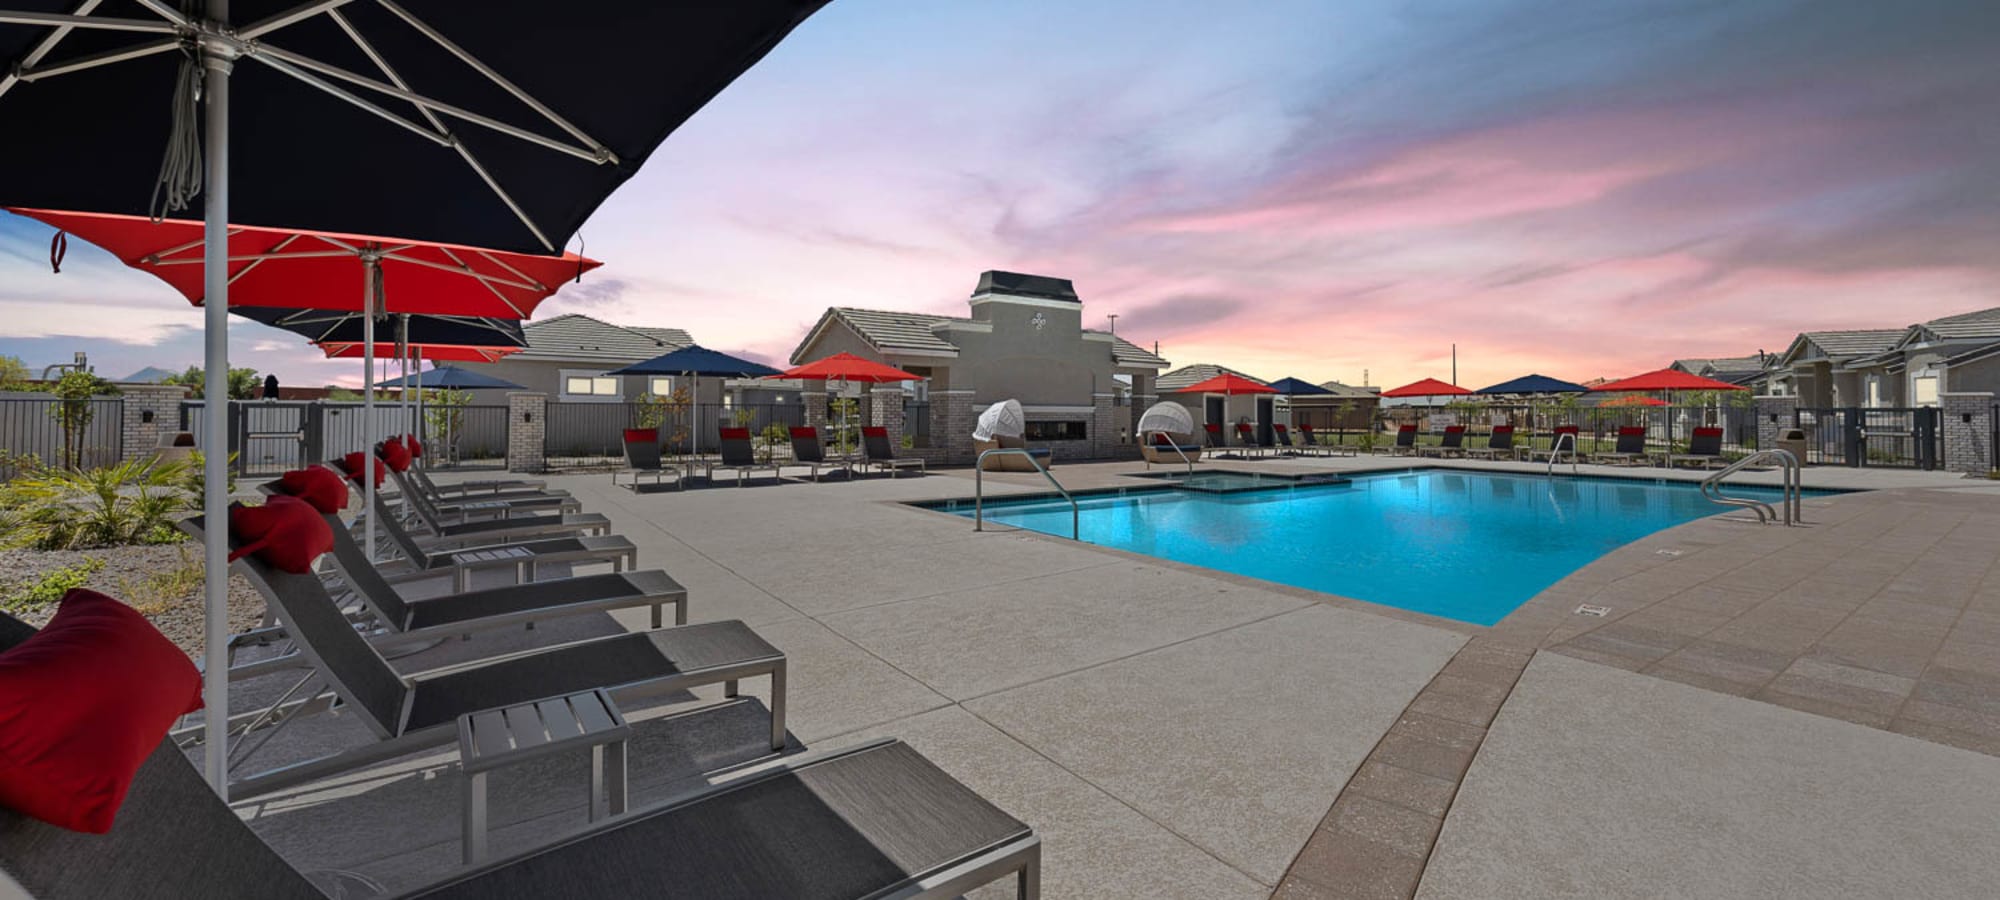 Sunset over pool area at Cottages at McDowell in Avondale, Arizona